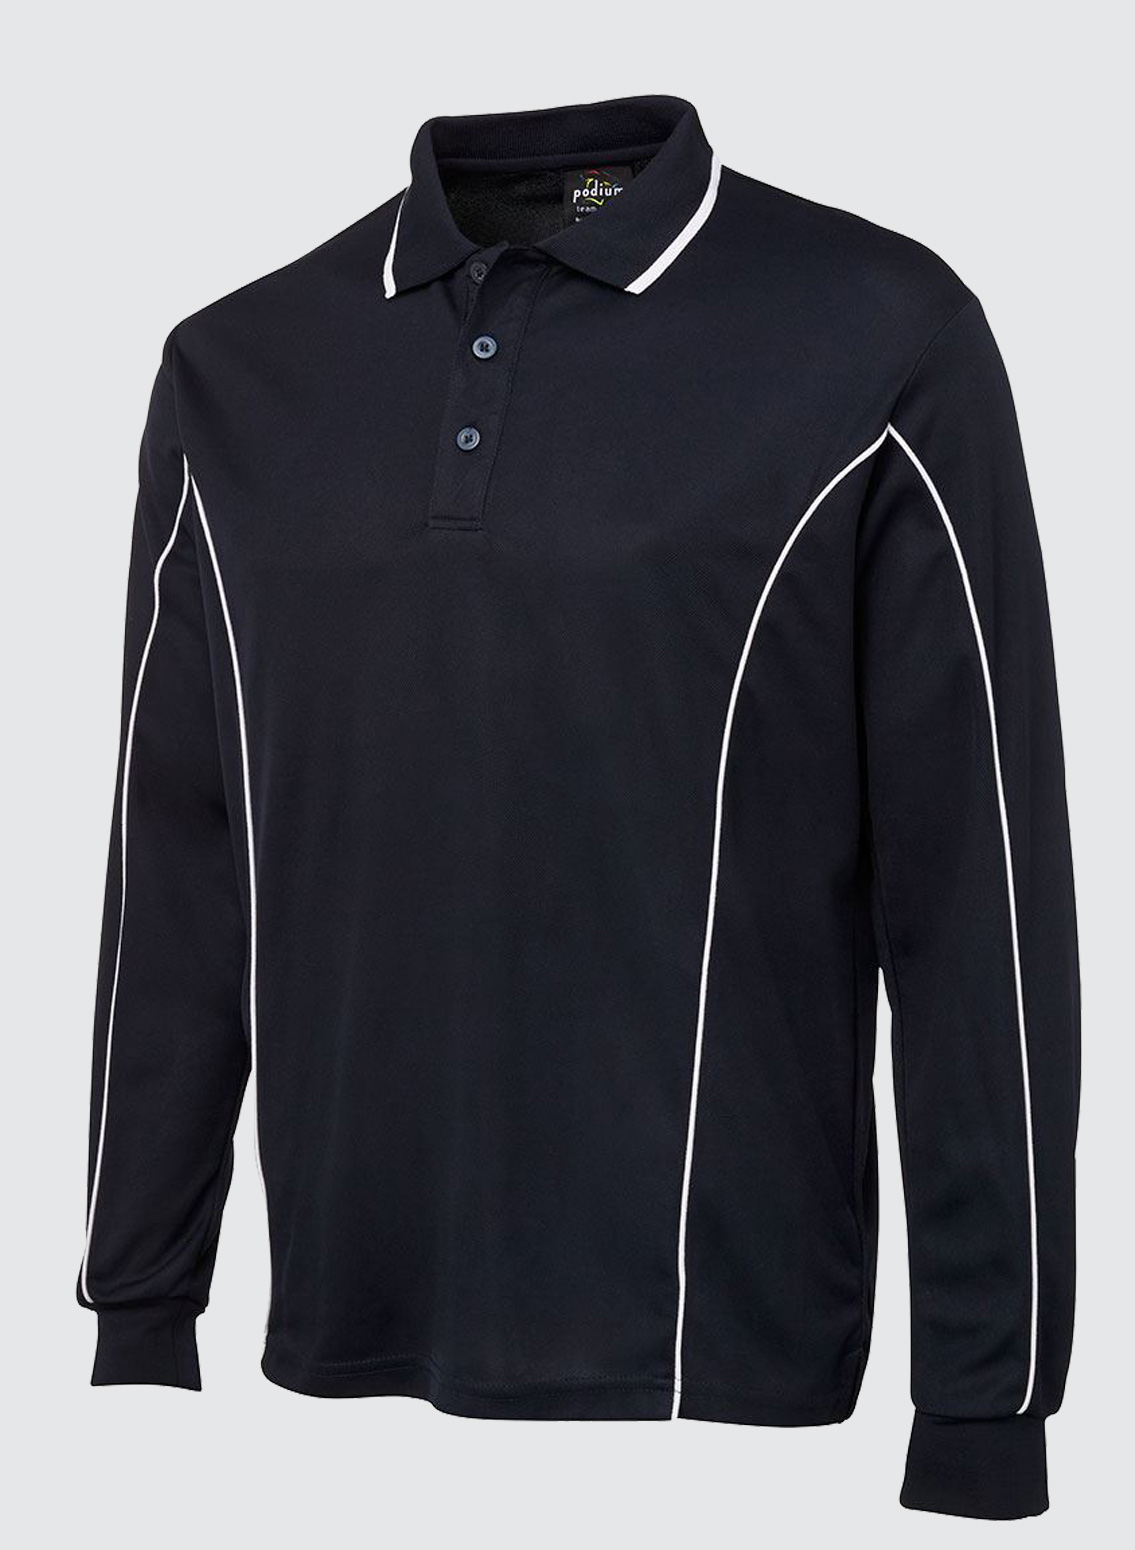 7PIPL L/S Piping Polo